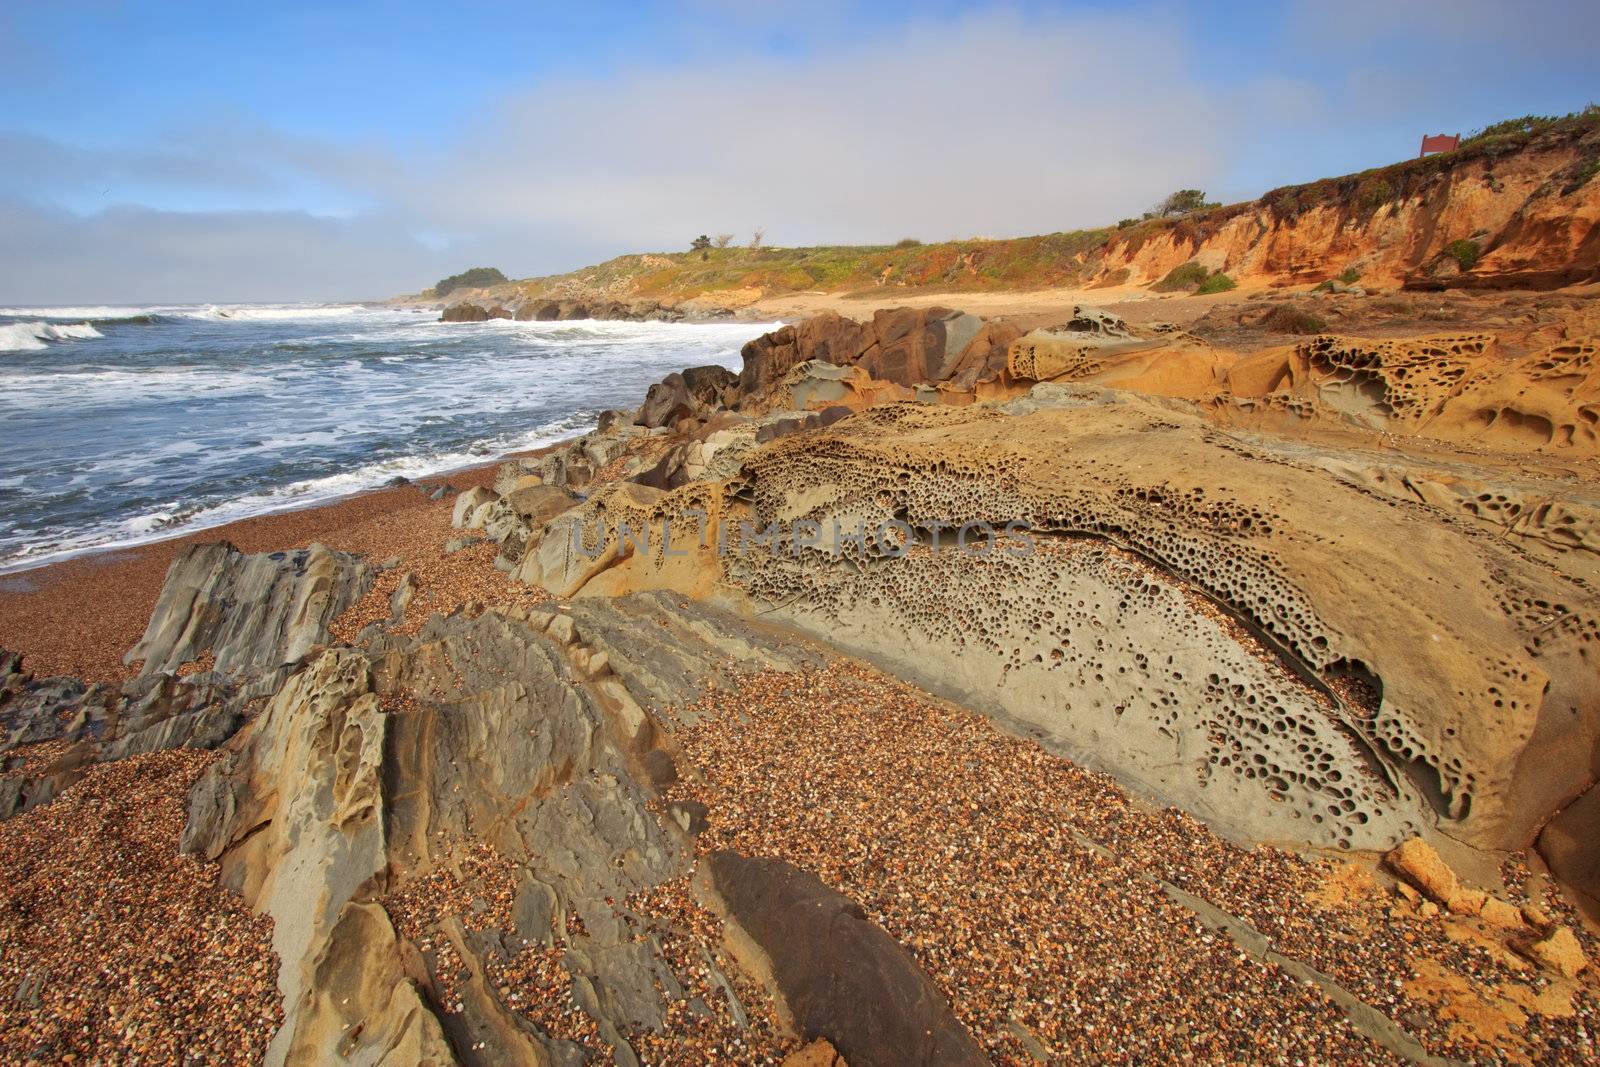 Pebble Beach and tafoni formations in Pigeon Point formation sandstone at Bean Hollow State Beach in San Mateo County, California against a blue sky and white clouds